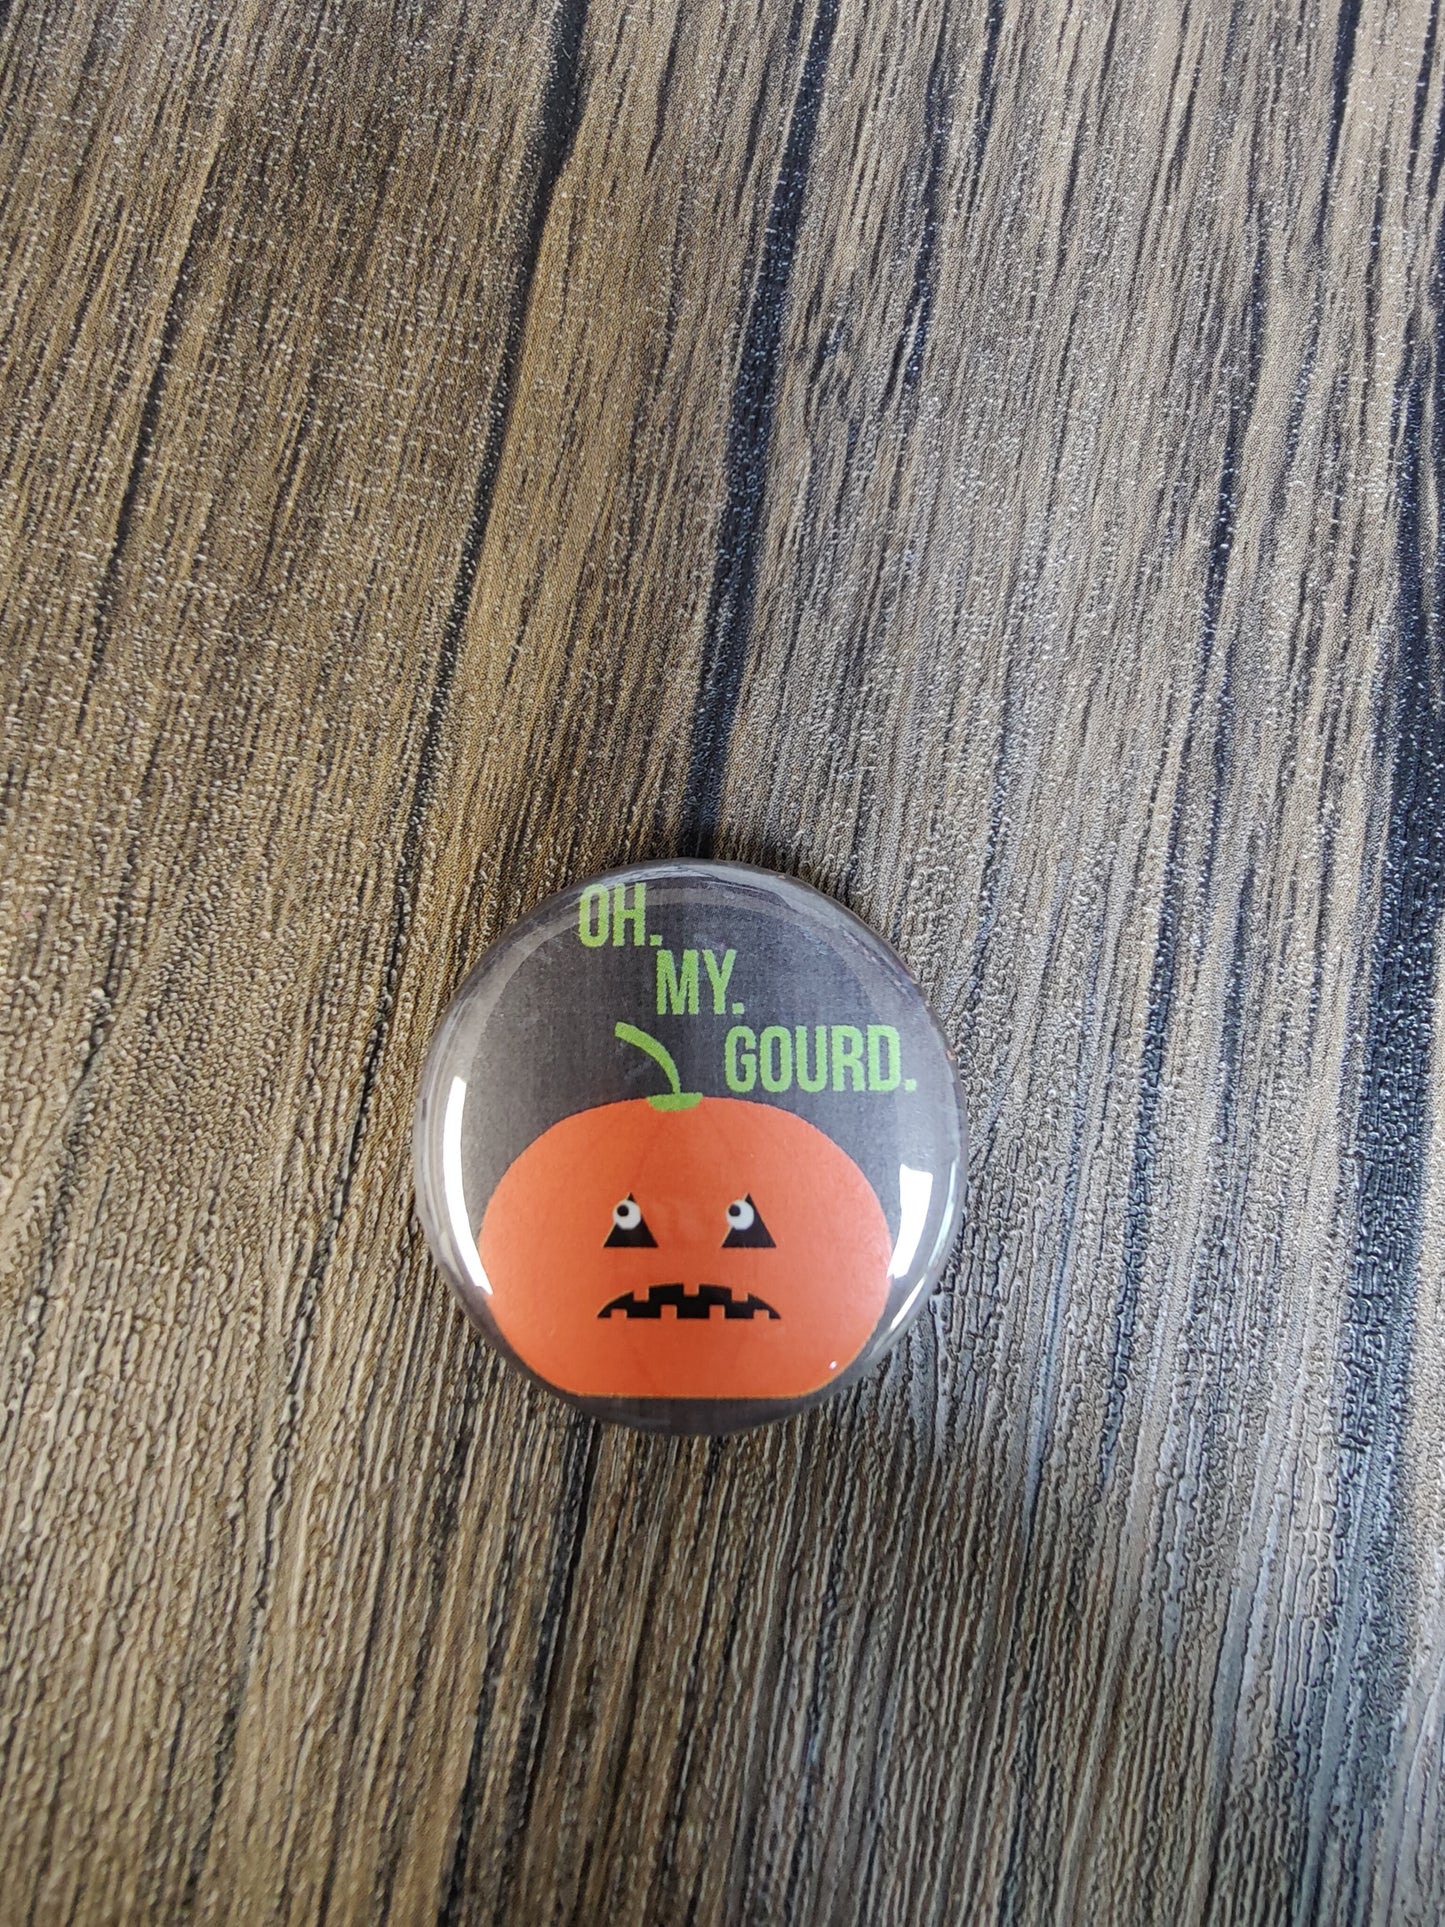 Oh. My. Gourd. Button